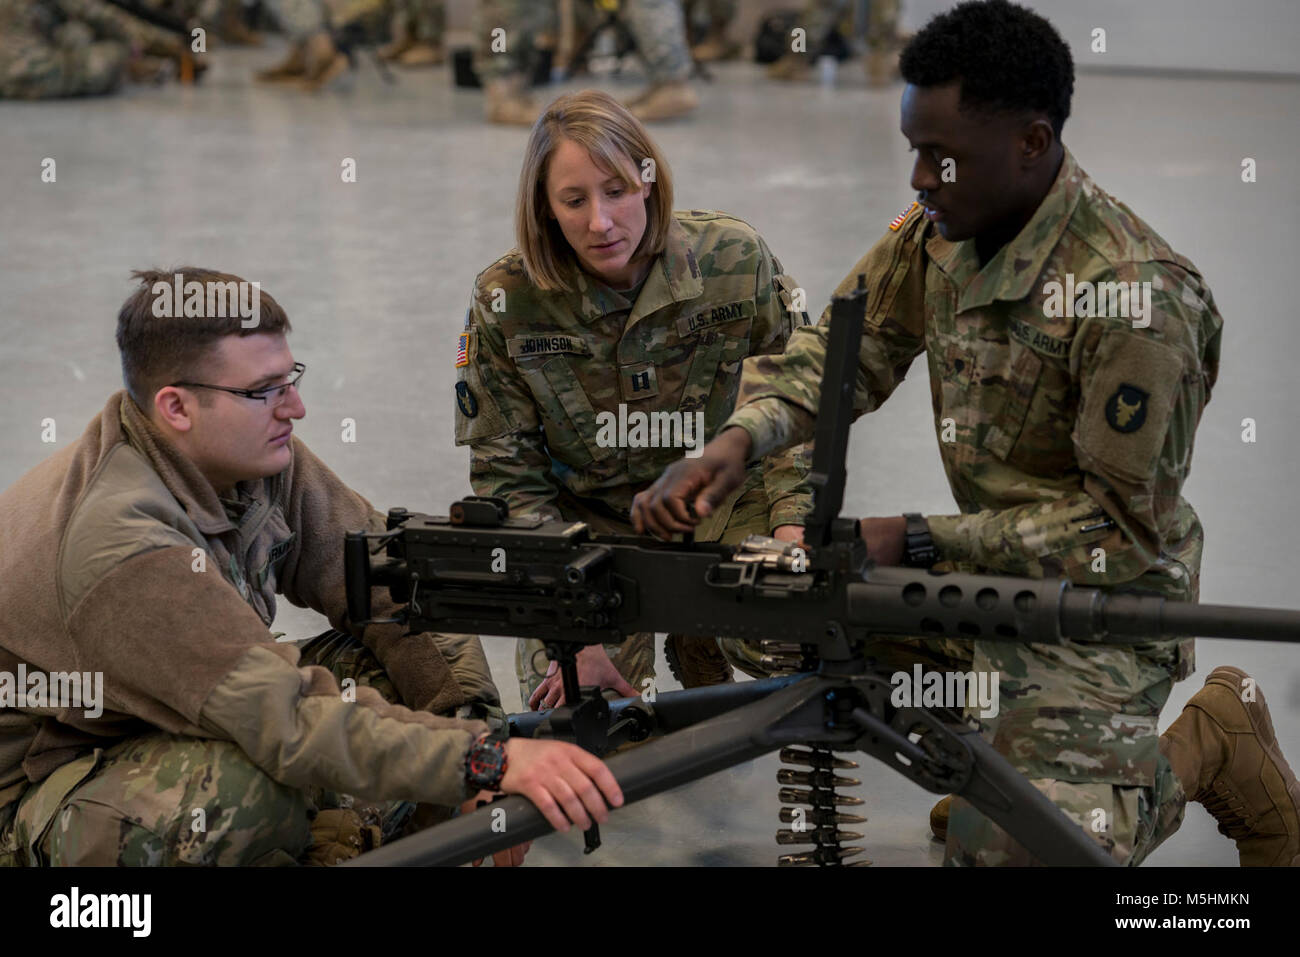 Capt. Janelle Johnson (center), commander of A Co., 134th Brigade Support Battalion, listens to Pfc. Bryan Christenson (left) and Spc. Mainza Malambo (right), both petroleum supply specialists with A Co., 134th BSB, explain how to qualify on the M2 .50-caliber machine gun during weapons training on Feb. 11, 2018, in Arden Hills, Minn. A unique quality about Johnson is that she can relate to Soldiers at every level because she has trained as an enlisted Soldier and a warrent officer before becoming a commissioned officer. (Minnesota National Guard Stock Photo